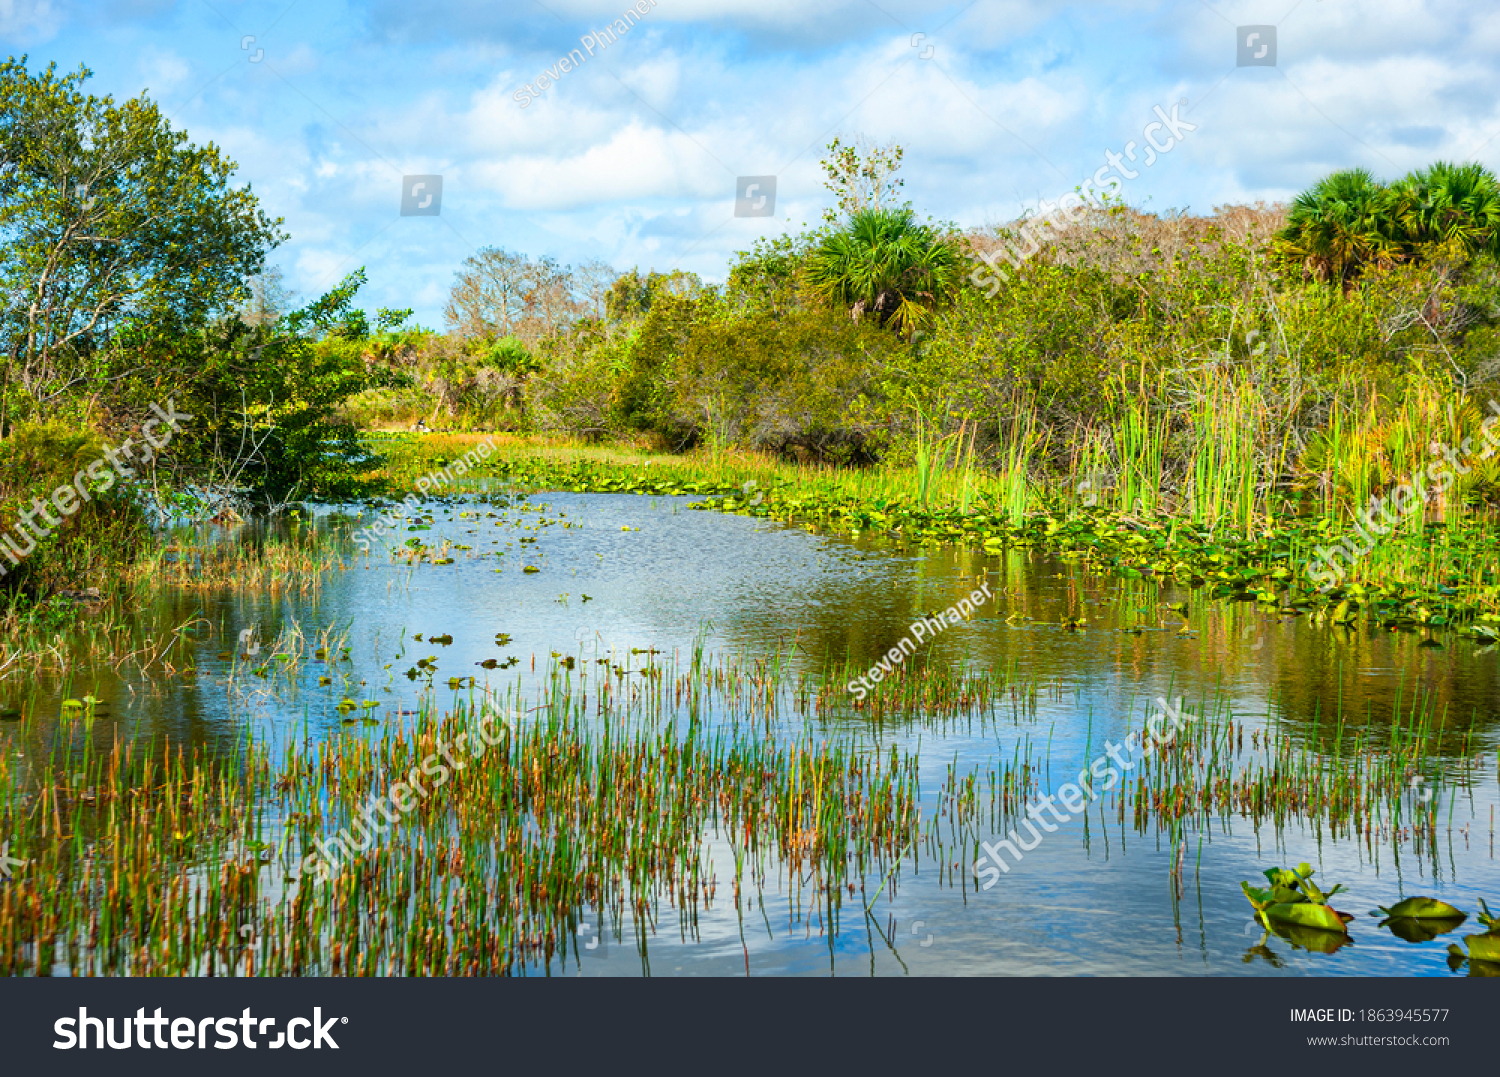 View of wetland areas in the Central Florida. Wetlands and swamps are vitally important ecosystem for supporting a huge diversity of plants and animals. #1863945577